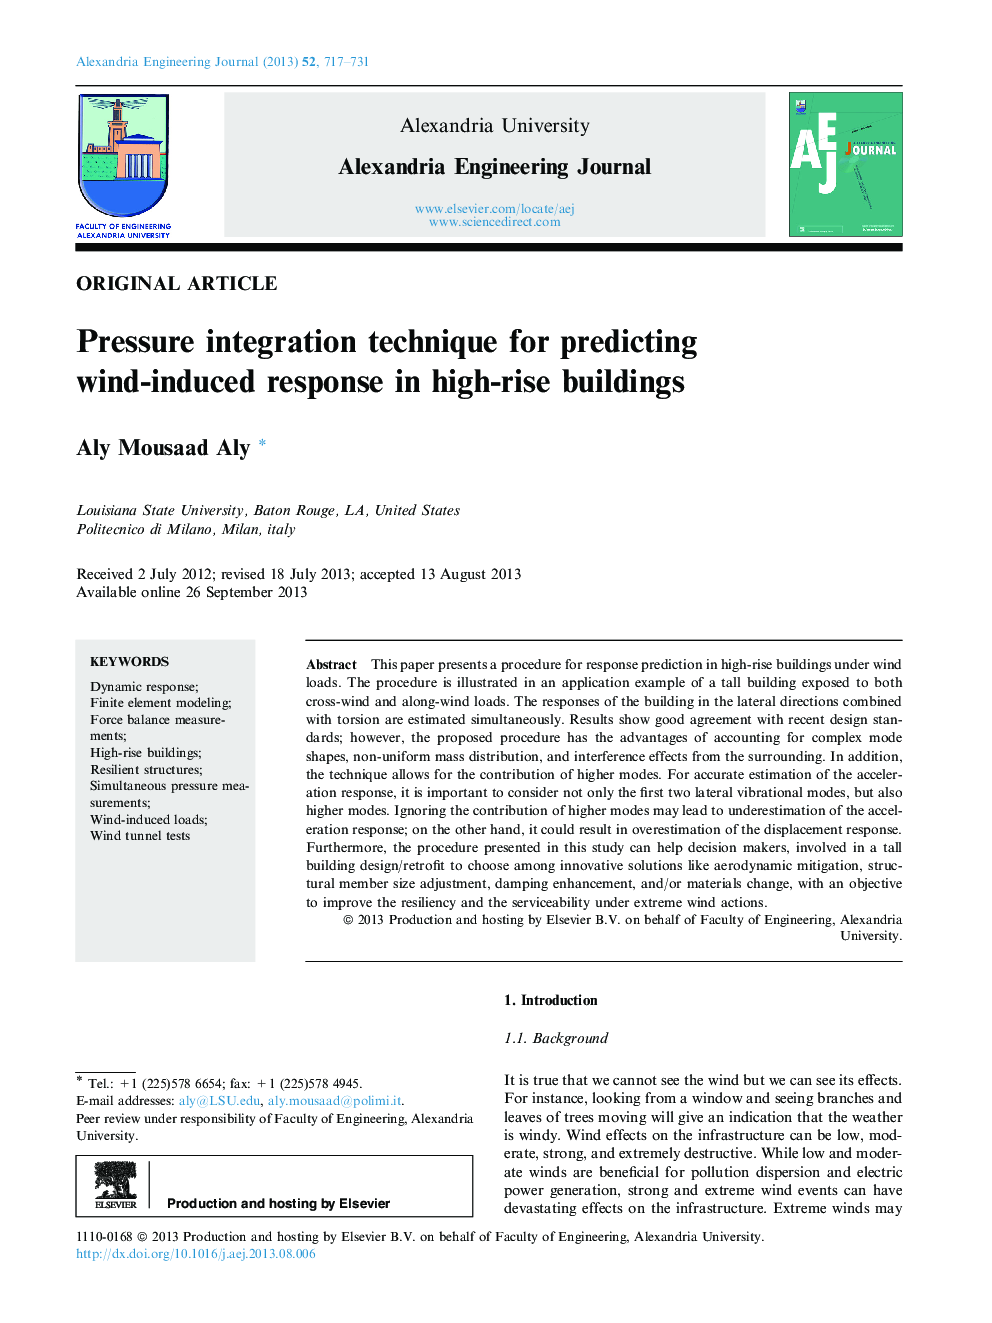 Pressure integration technique for predicting wind-induced response in high-rise buildings 